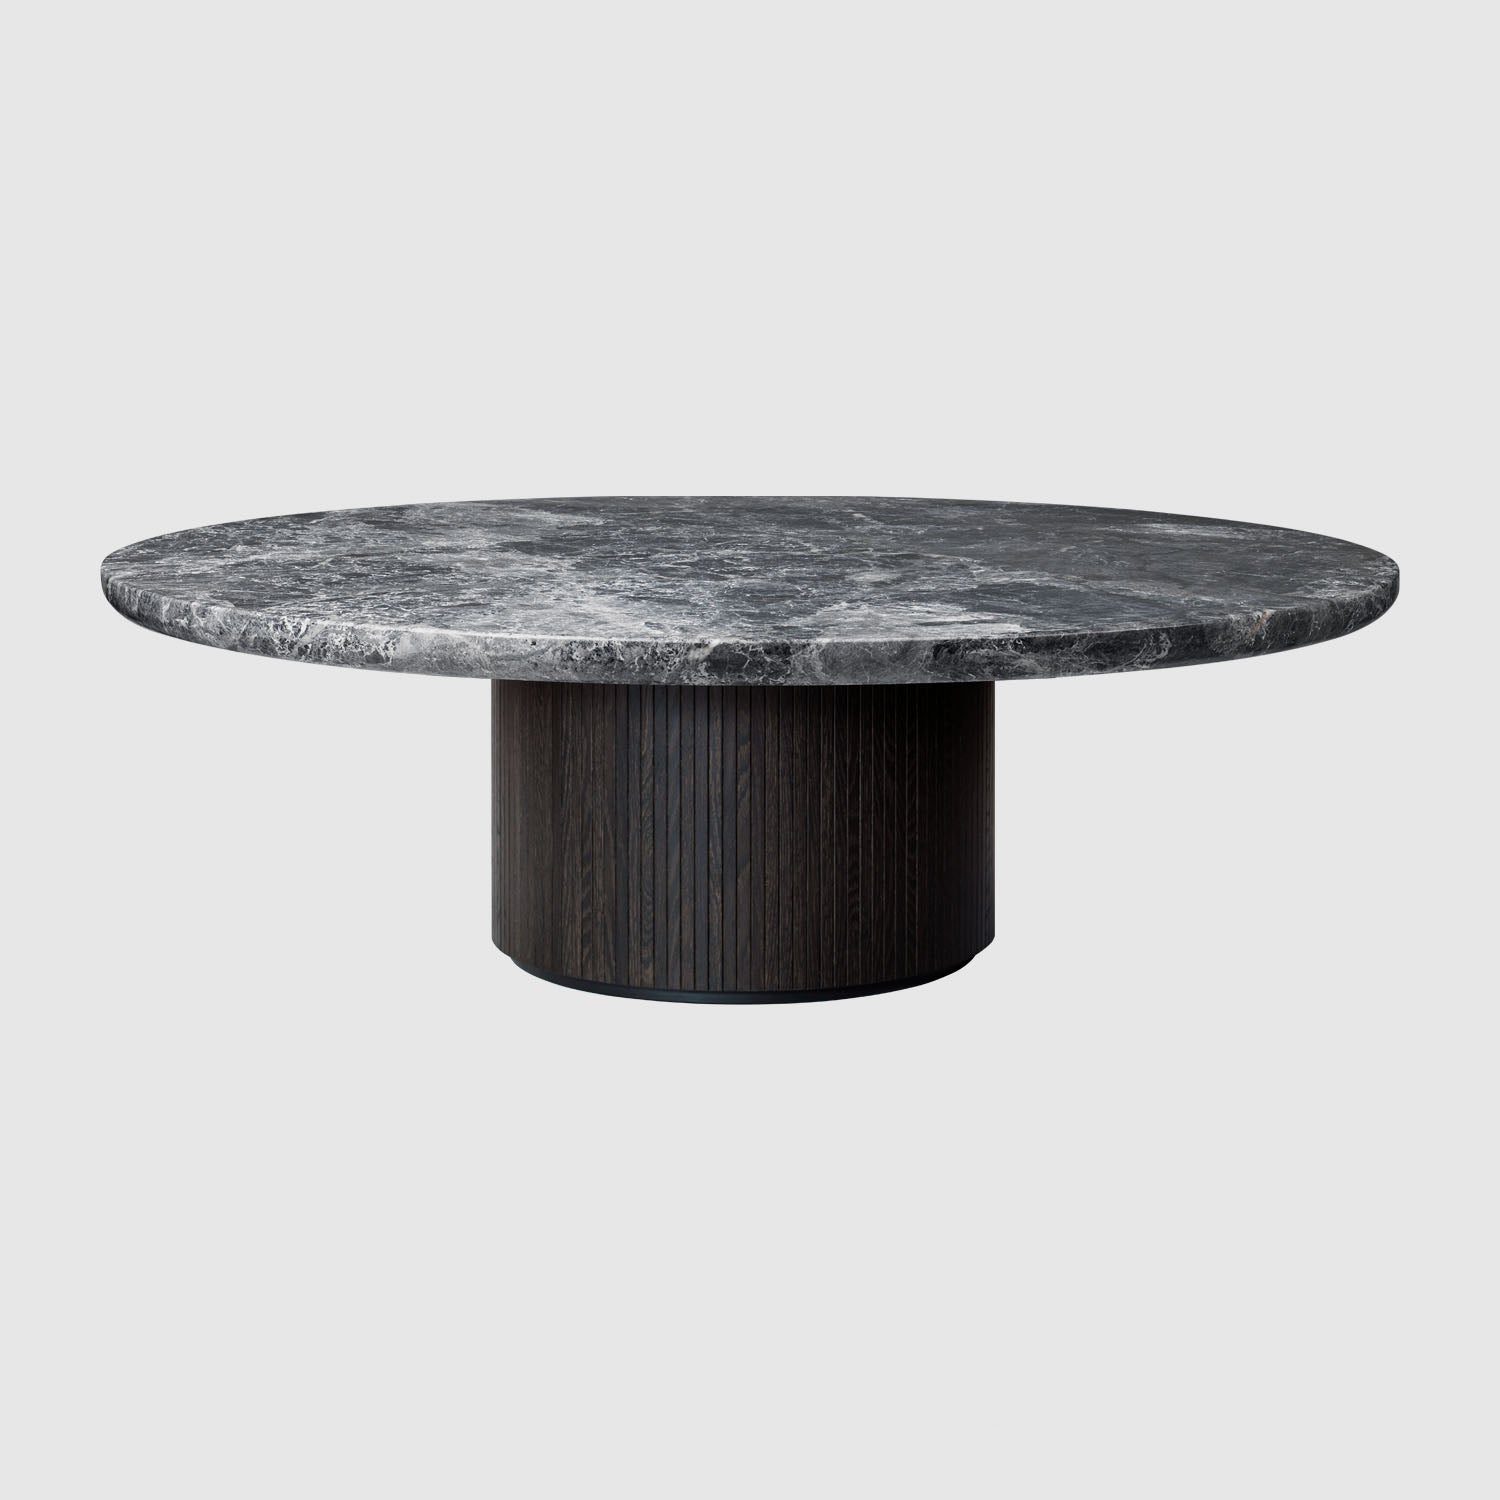 Small Round Glass Coffee Table Black / Round Black Coffee Tables Accent